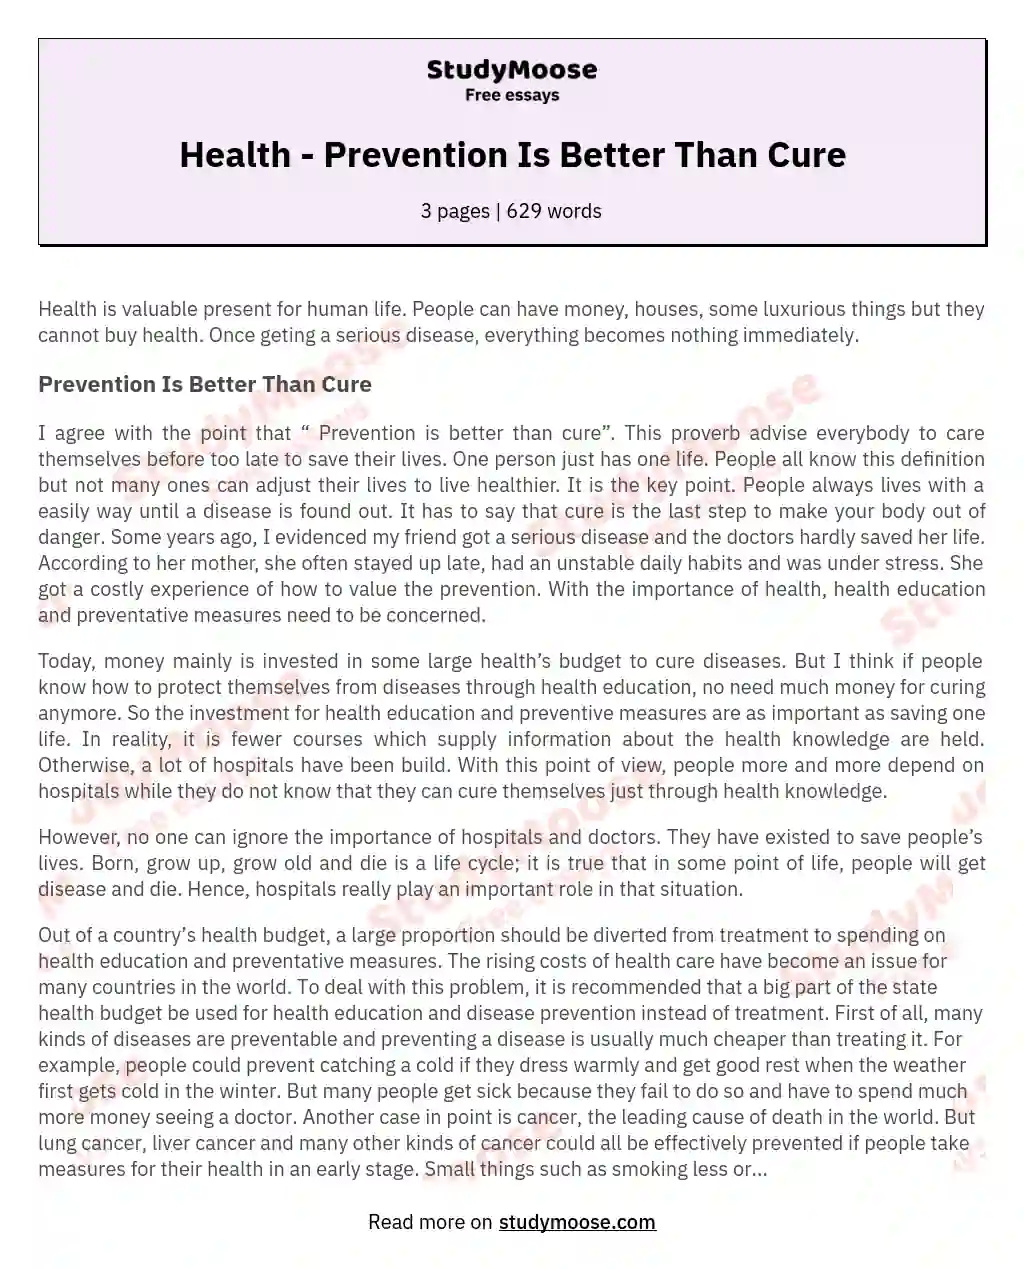 Health - Prevention Is Better Than Cure